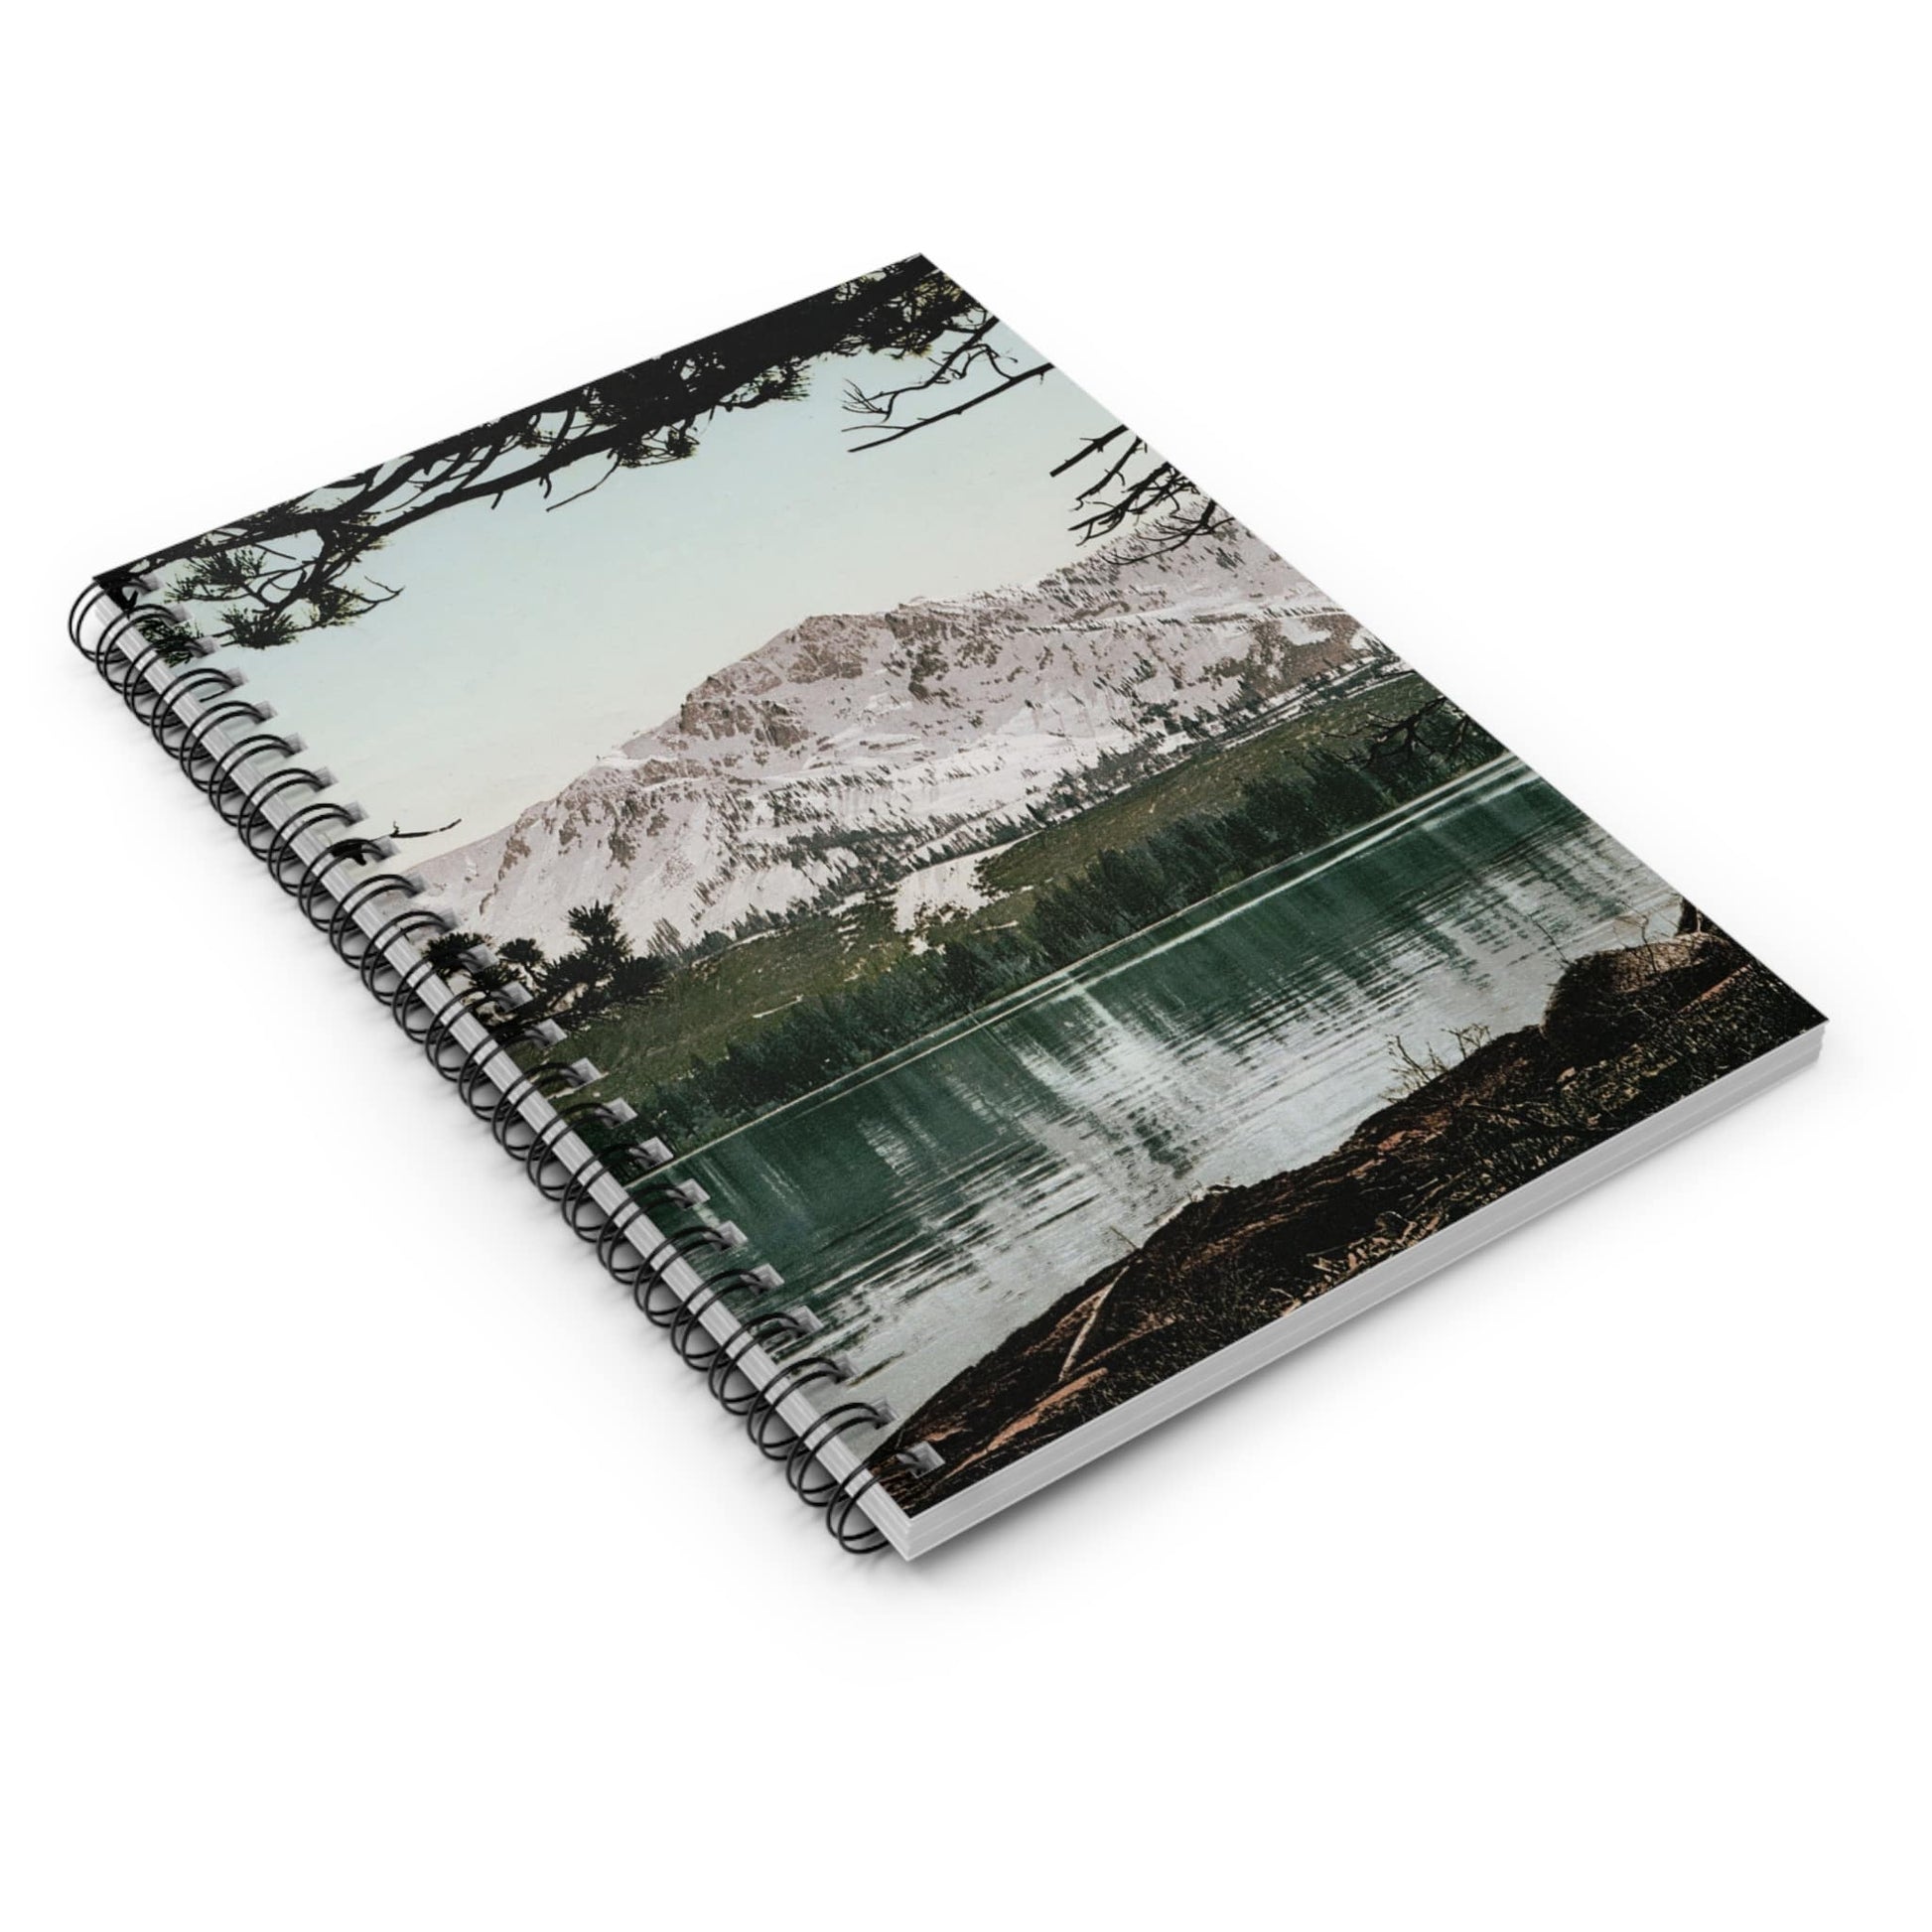 Snowy Mountains Spiral Notebook Laying Flat on White Surface